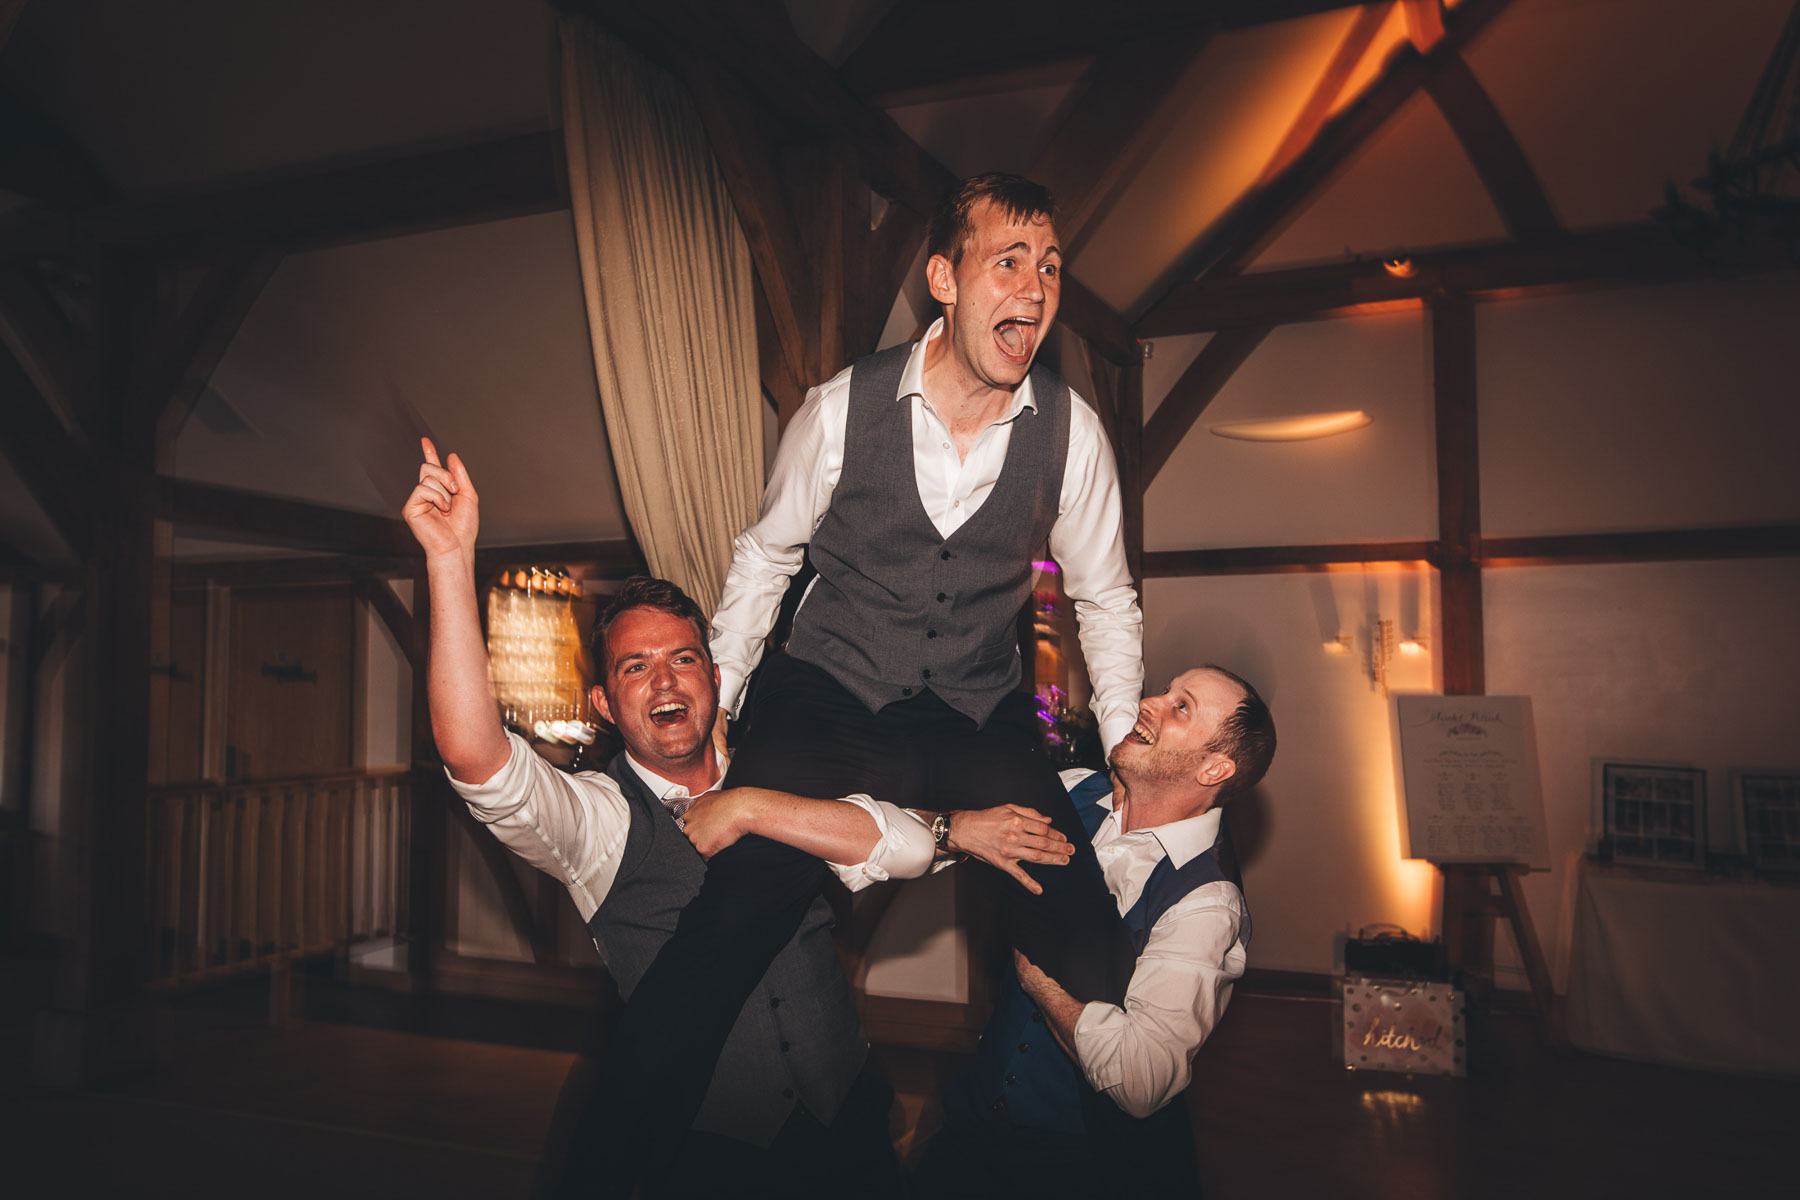 friends pick up the groom and raise him up